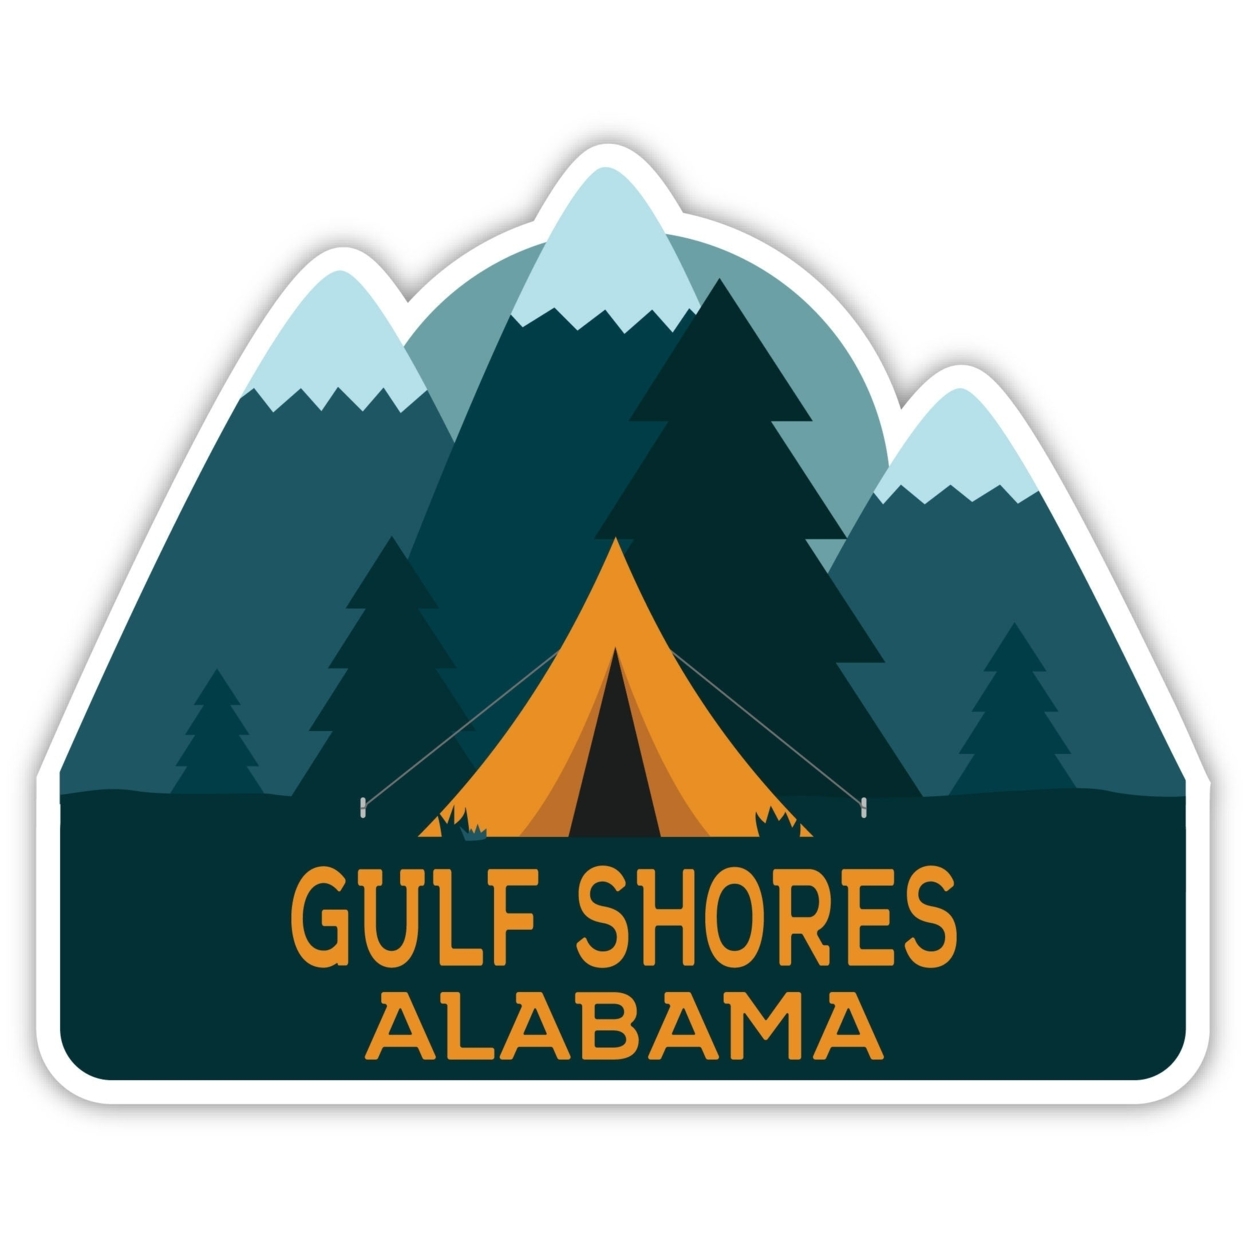 Gulf Shores Alabama Souvenir Decorative Stickers (Choose Theme And Size) - Single Unit, 8-Inch, Great Outdoors